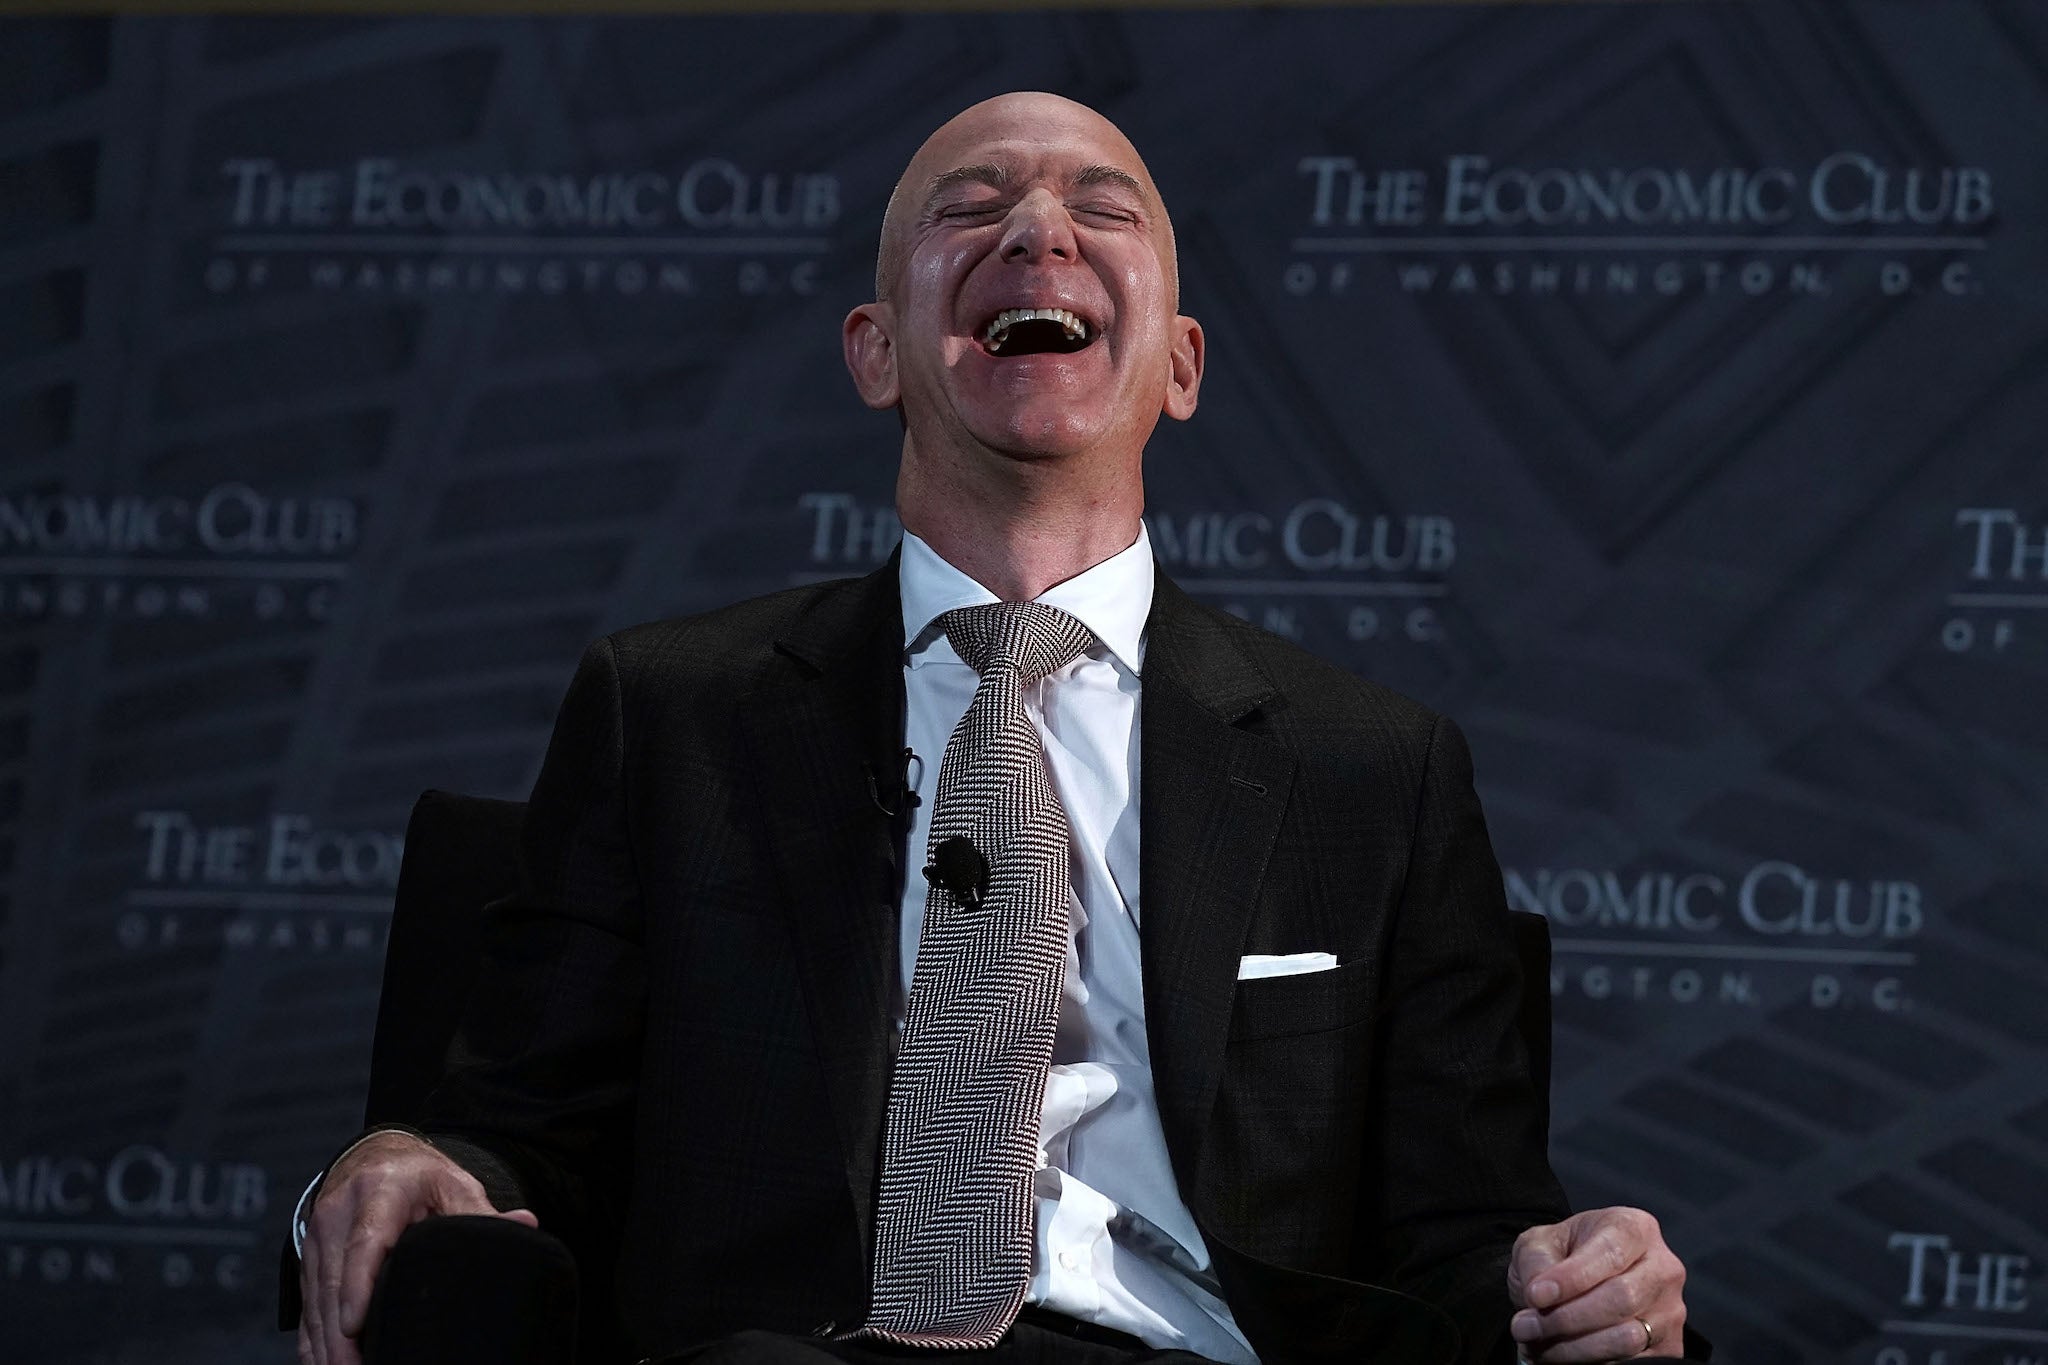 Laughing all the way to the bank: Jeff Bezos was able to pay zero income tax in 2007 and 2011, according to data obtained by ProPublica